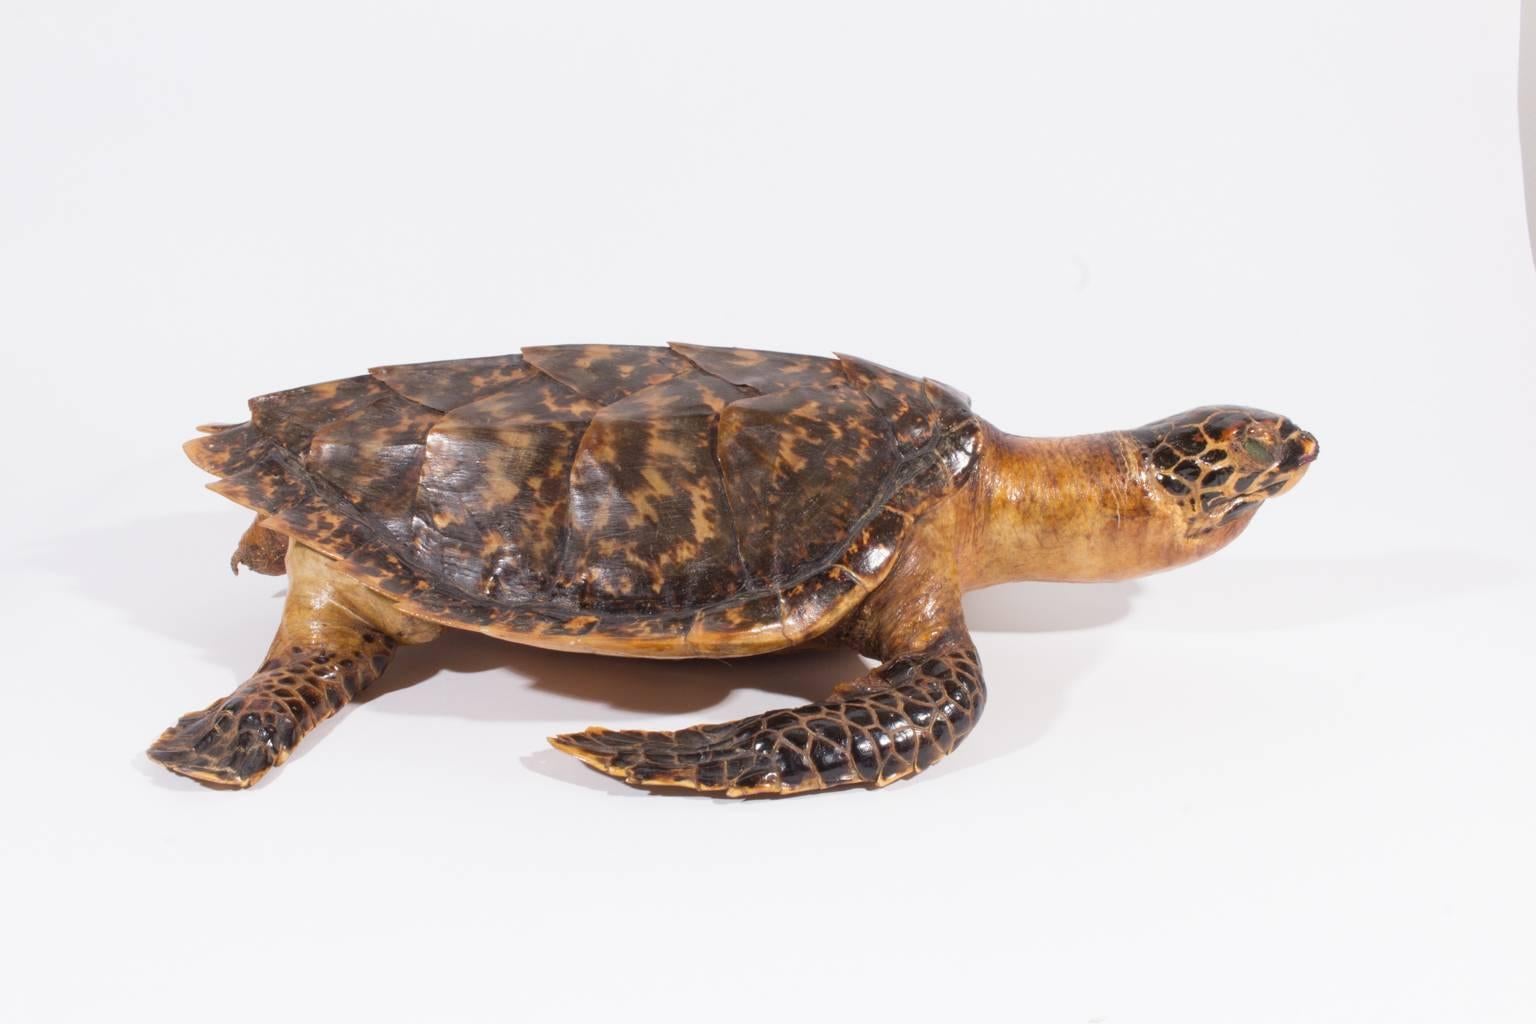 An exceptional piece discovered in France, this antique taxidermy tortoise is in remarkable condition with beautiful coloring in it's shell. The entire piece is intact and we believe it dates to the 1930s. Measures 20